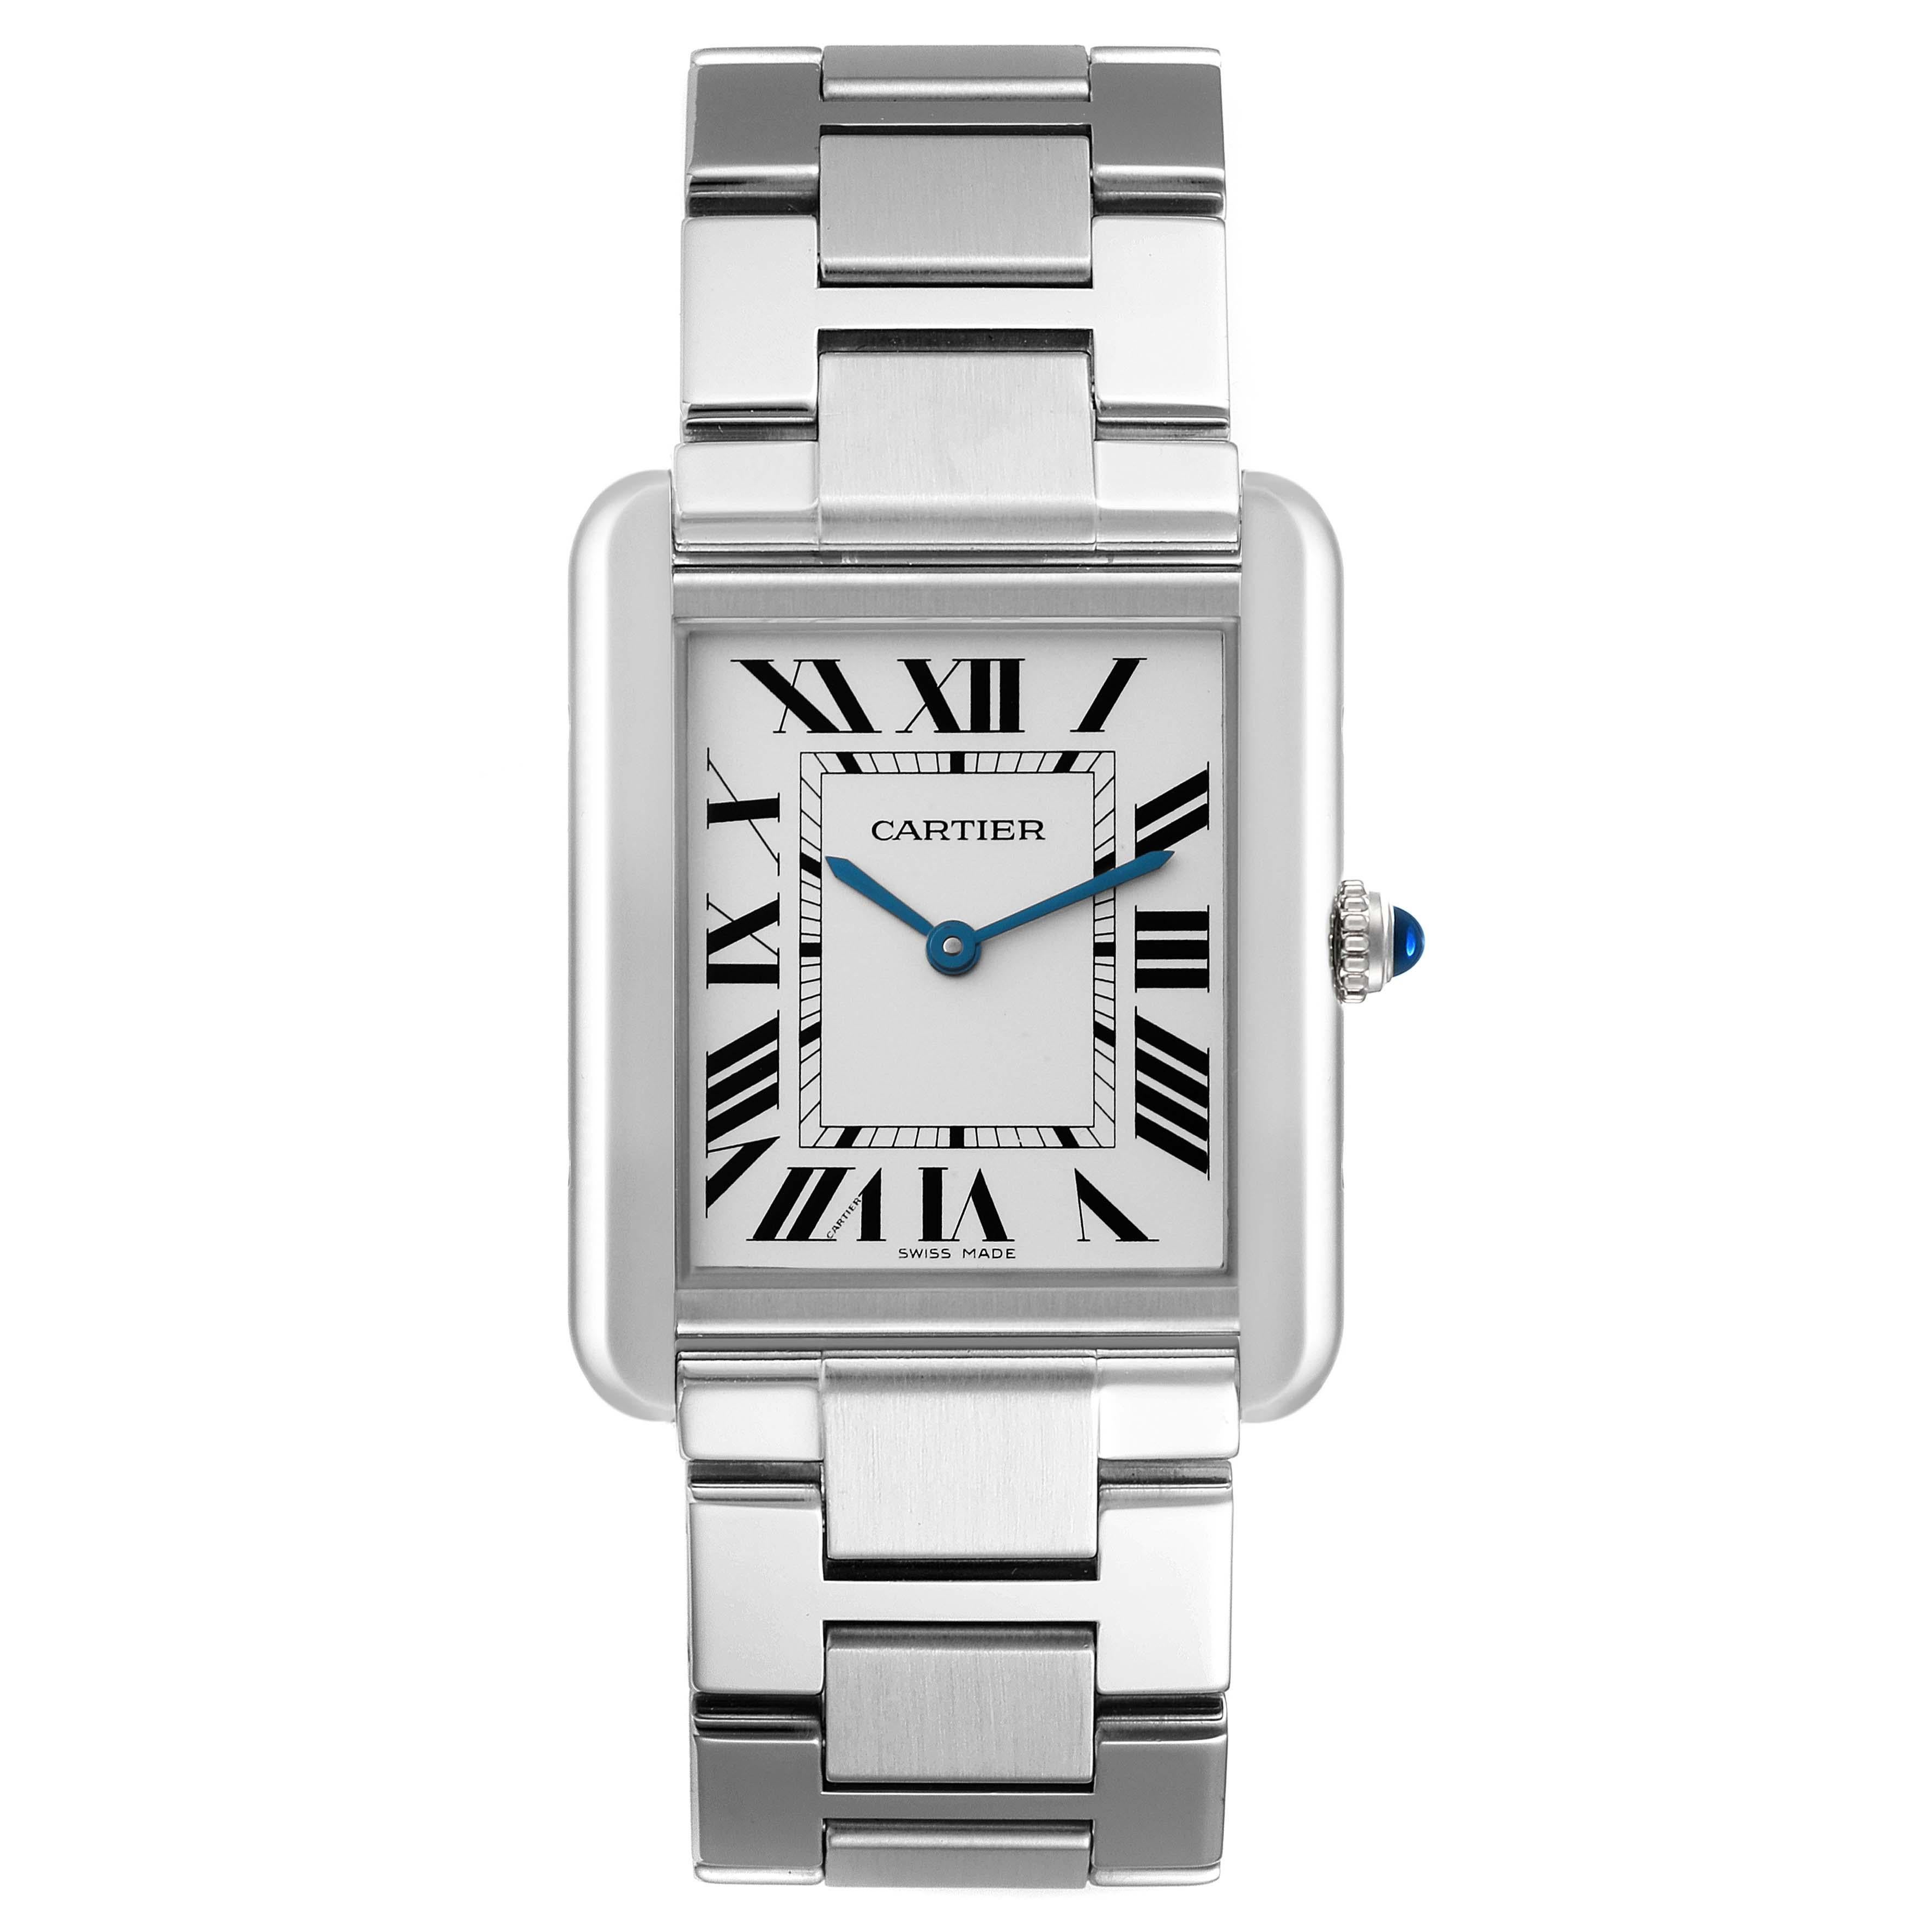 Cartier Tank Solo Silver Dial Steel Mens Watch W5200014. Quartz movement. Stainless steel case 27.0 x 34.0 mm. Circular grained crown set with the blue spinel cabochon. . Scratch resistant sapphire crystal. Silver opaline dial. Black Roman numerals.